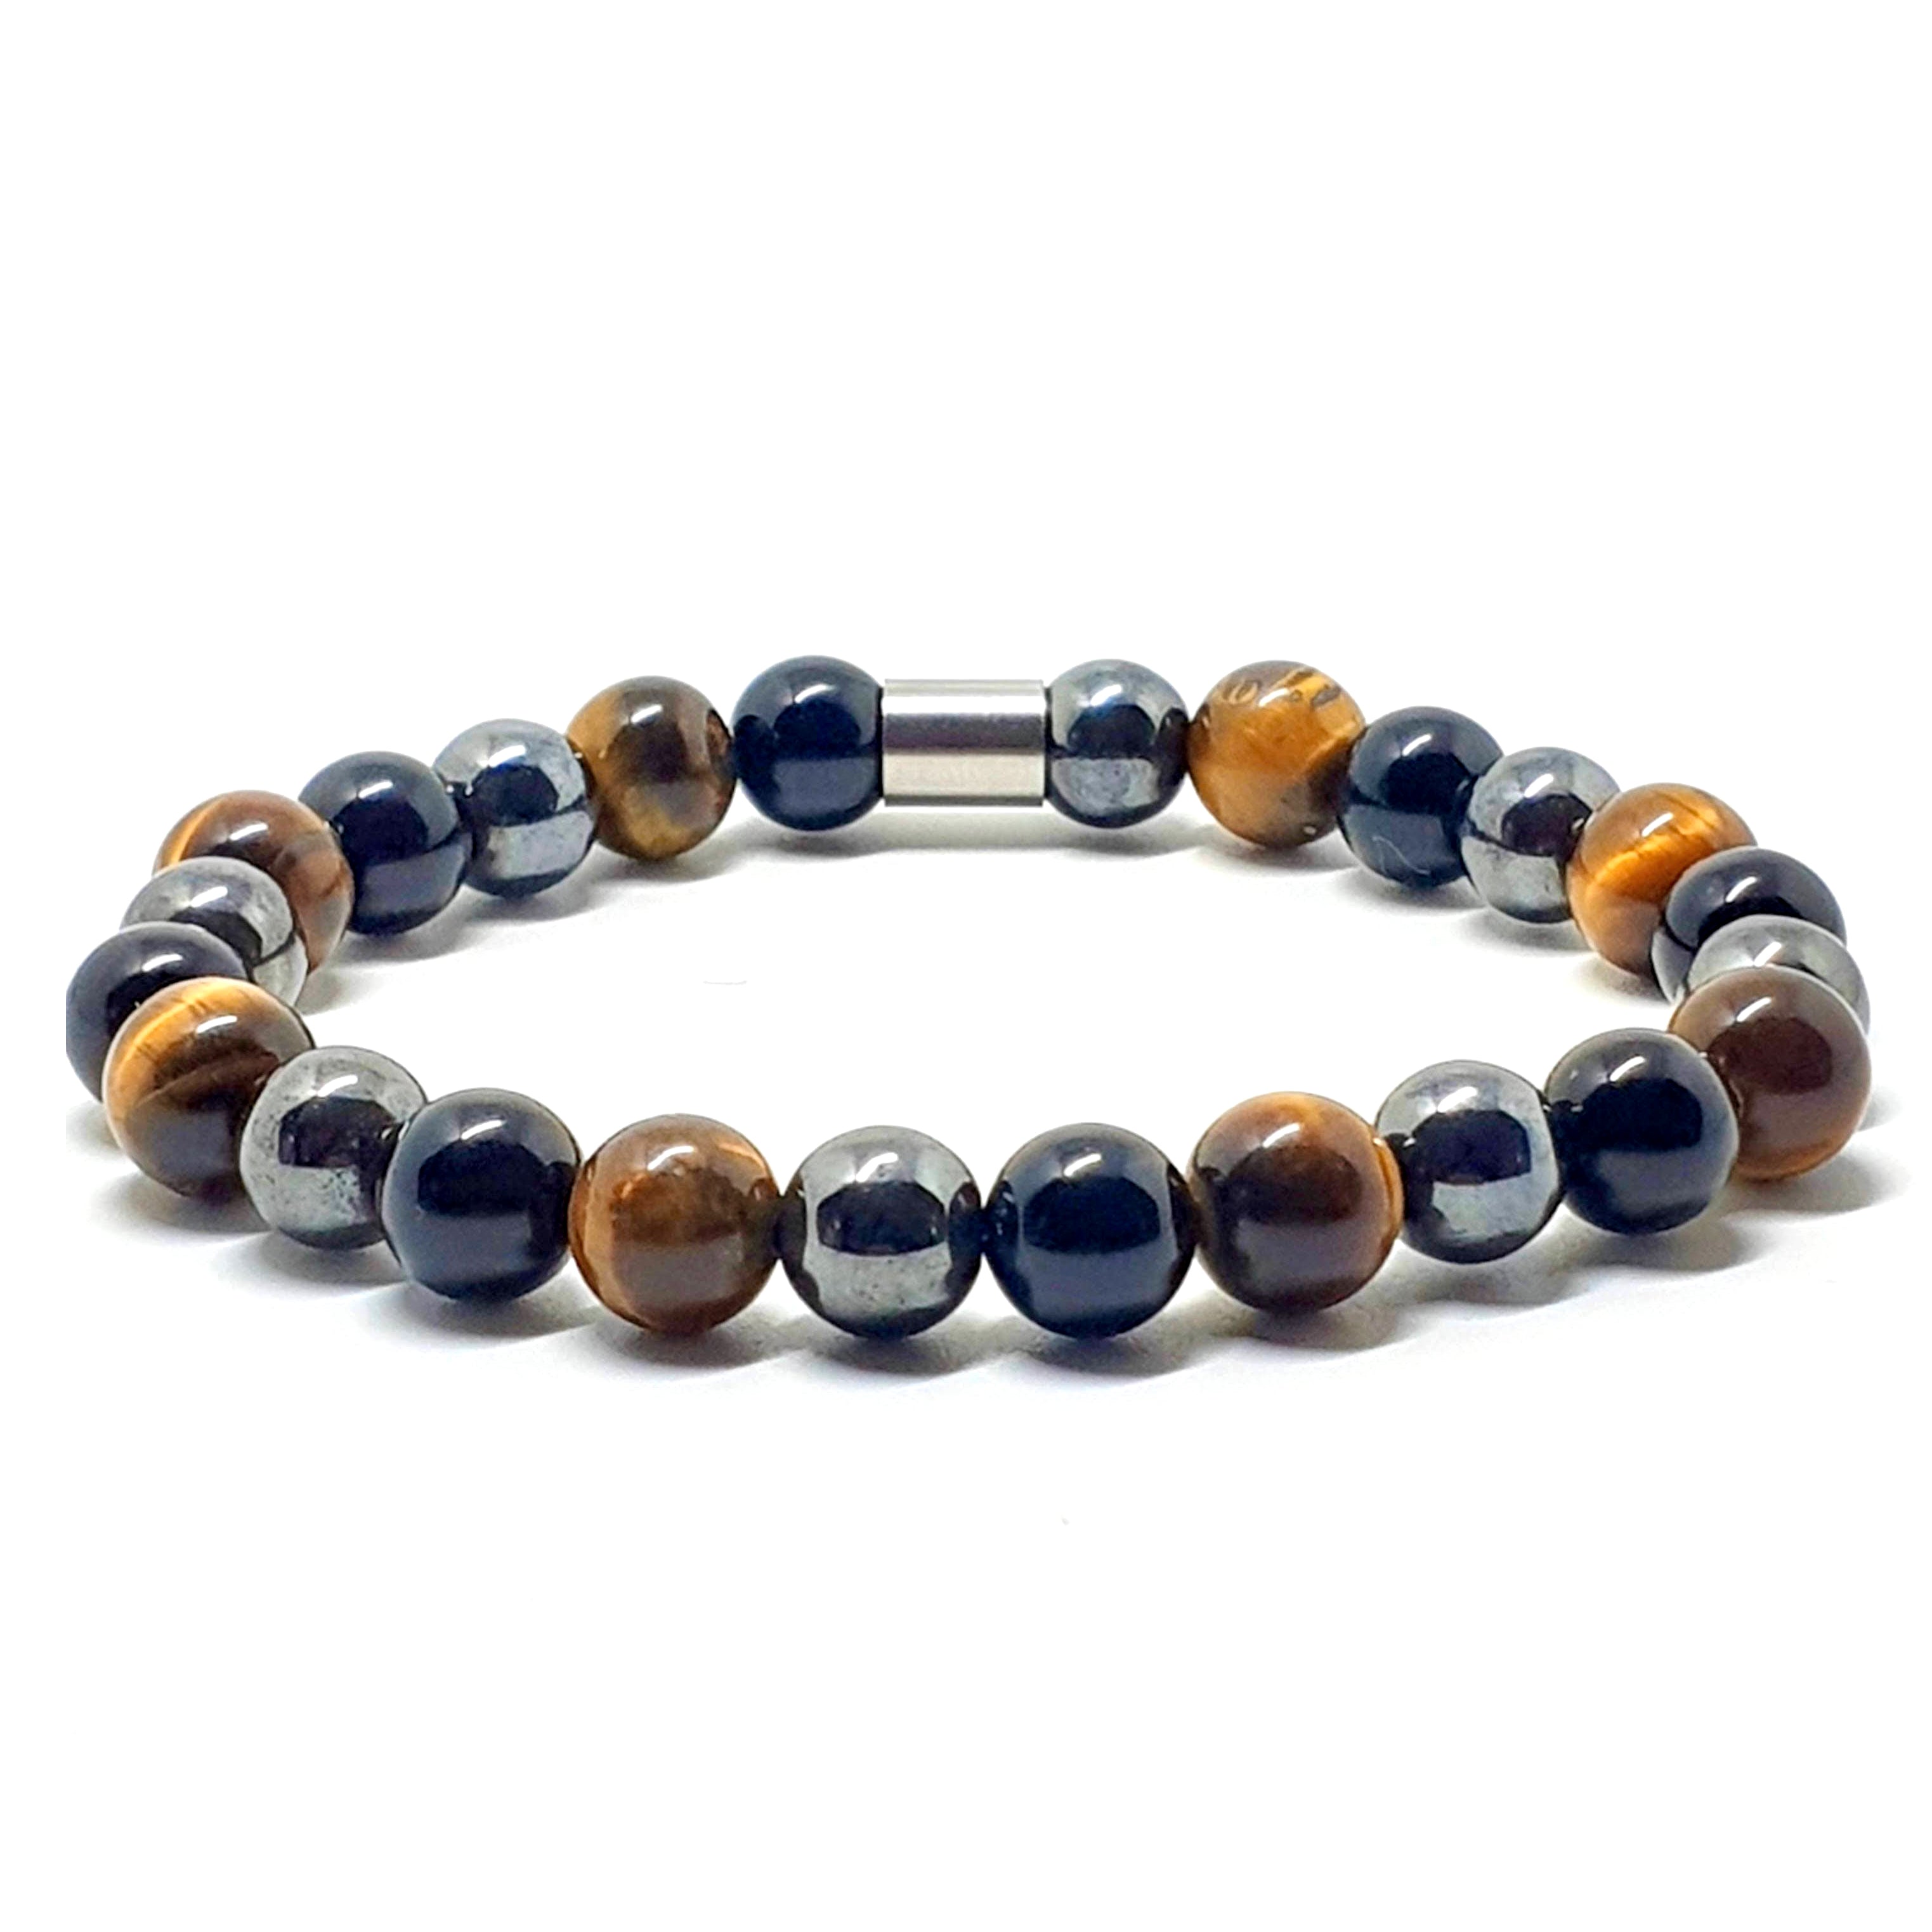 Hematite, Onyx and Tigers Eye with a stainless steel accessory